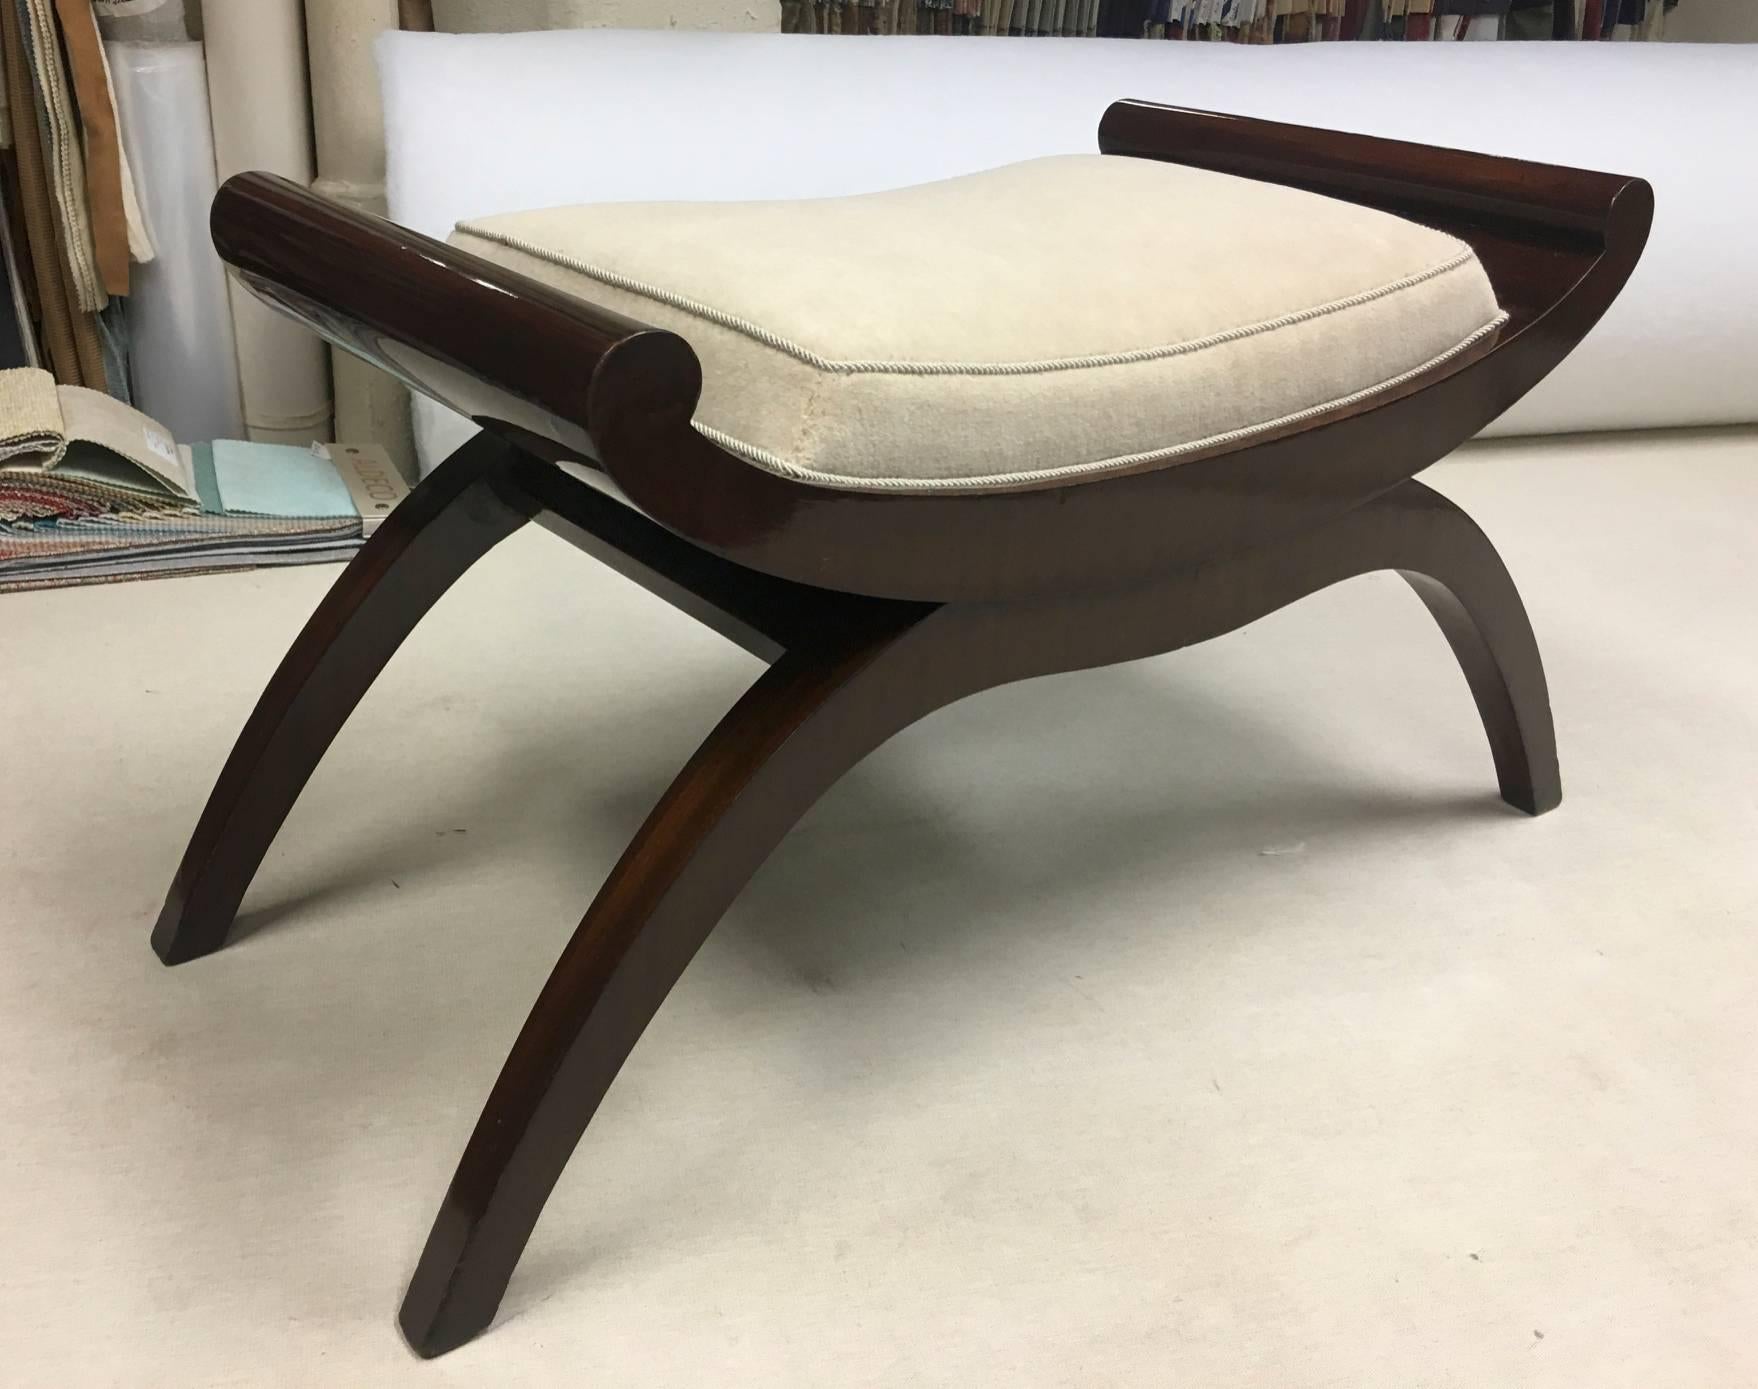 Maurice Dufrene superb Curule-shaped rosewood unique bench newly restored in mohair neutral cloth.